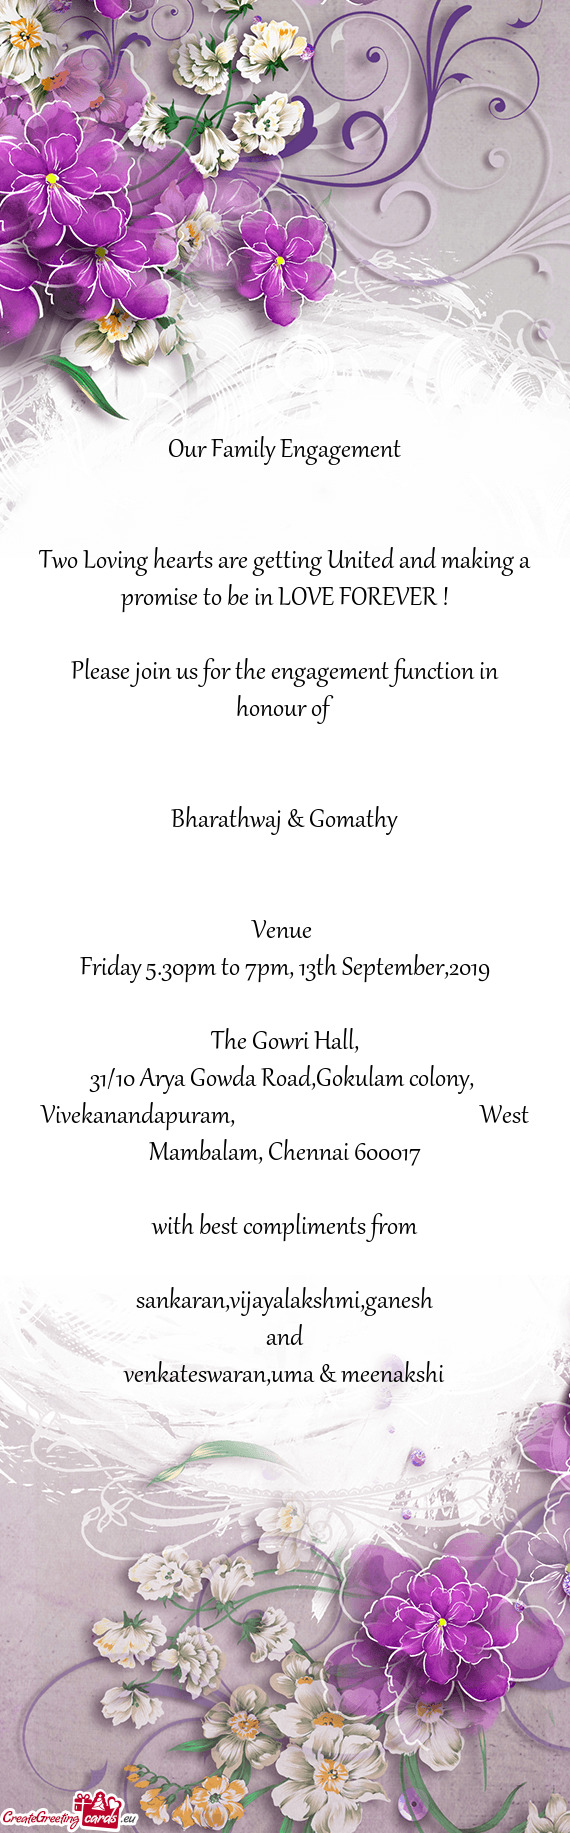 Please join us for the engagement function in honour of